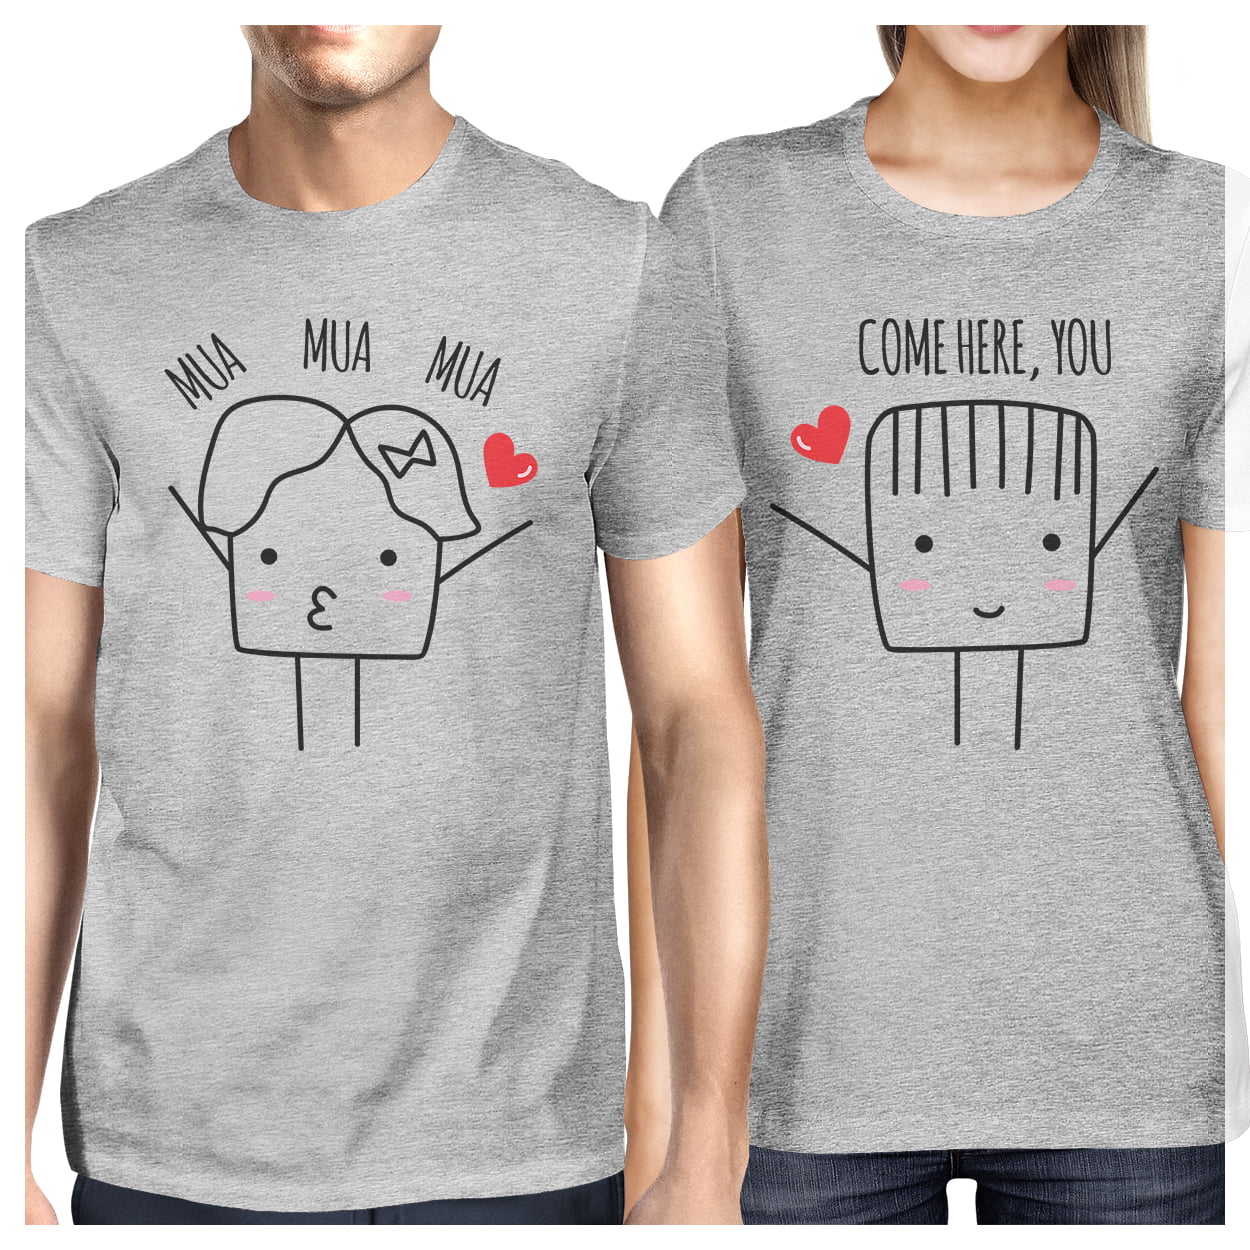 Rqyyd Matching Outfits for Couples Gifts for Him and Her Pizza and Slice Couple Shirts Short Sleeve Crewneck Valentine's Day Tees Shirt, Adult Unisex